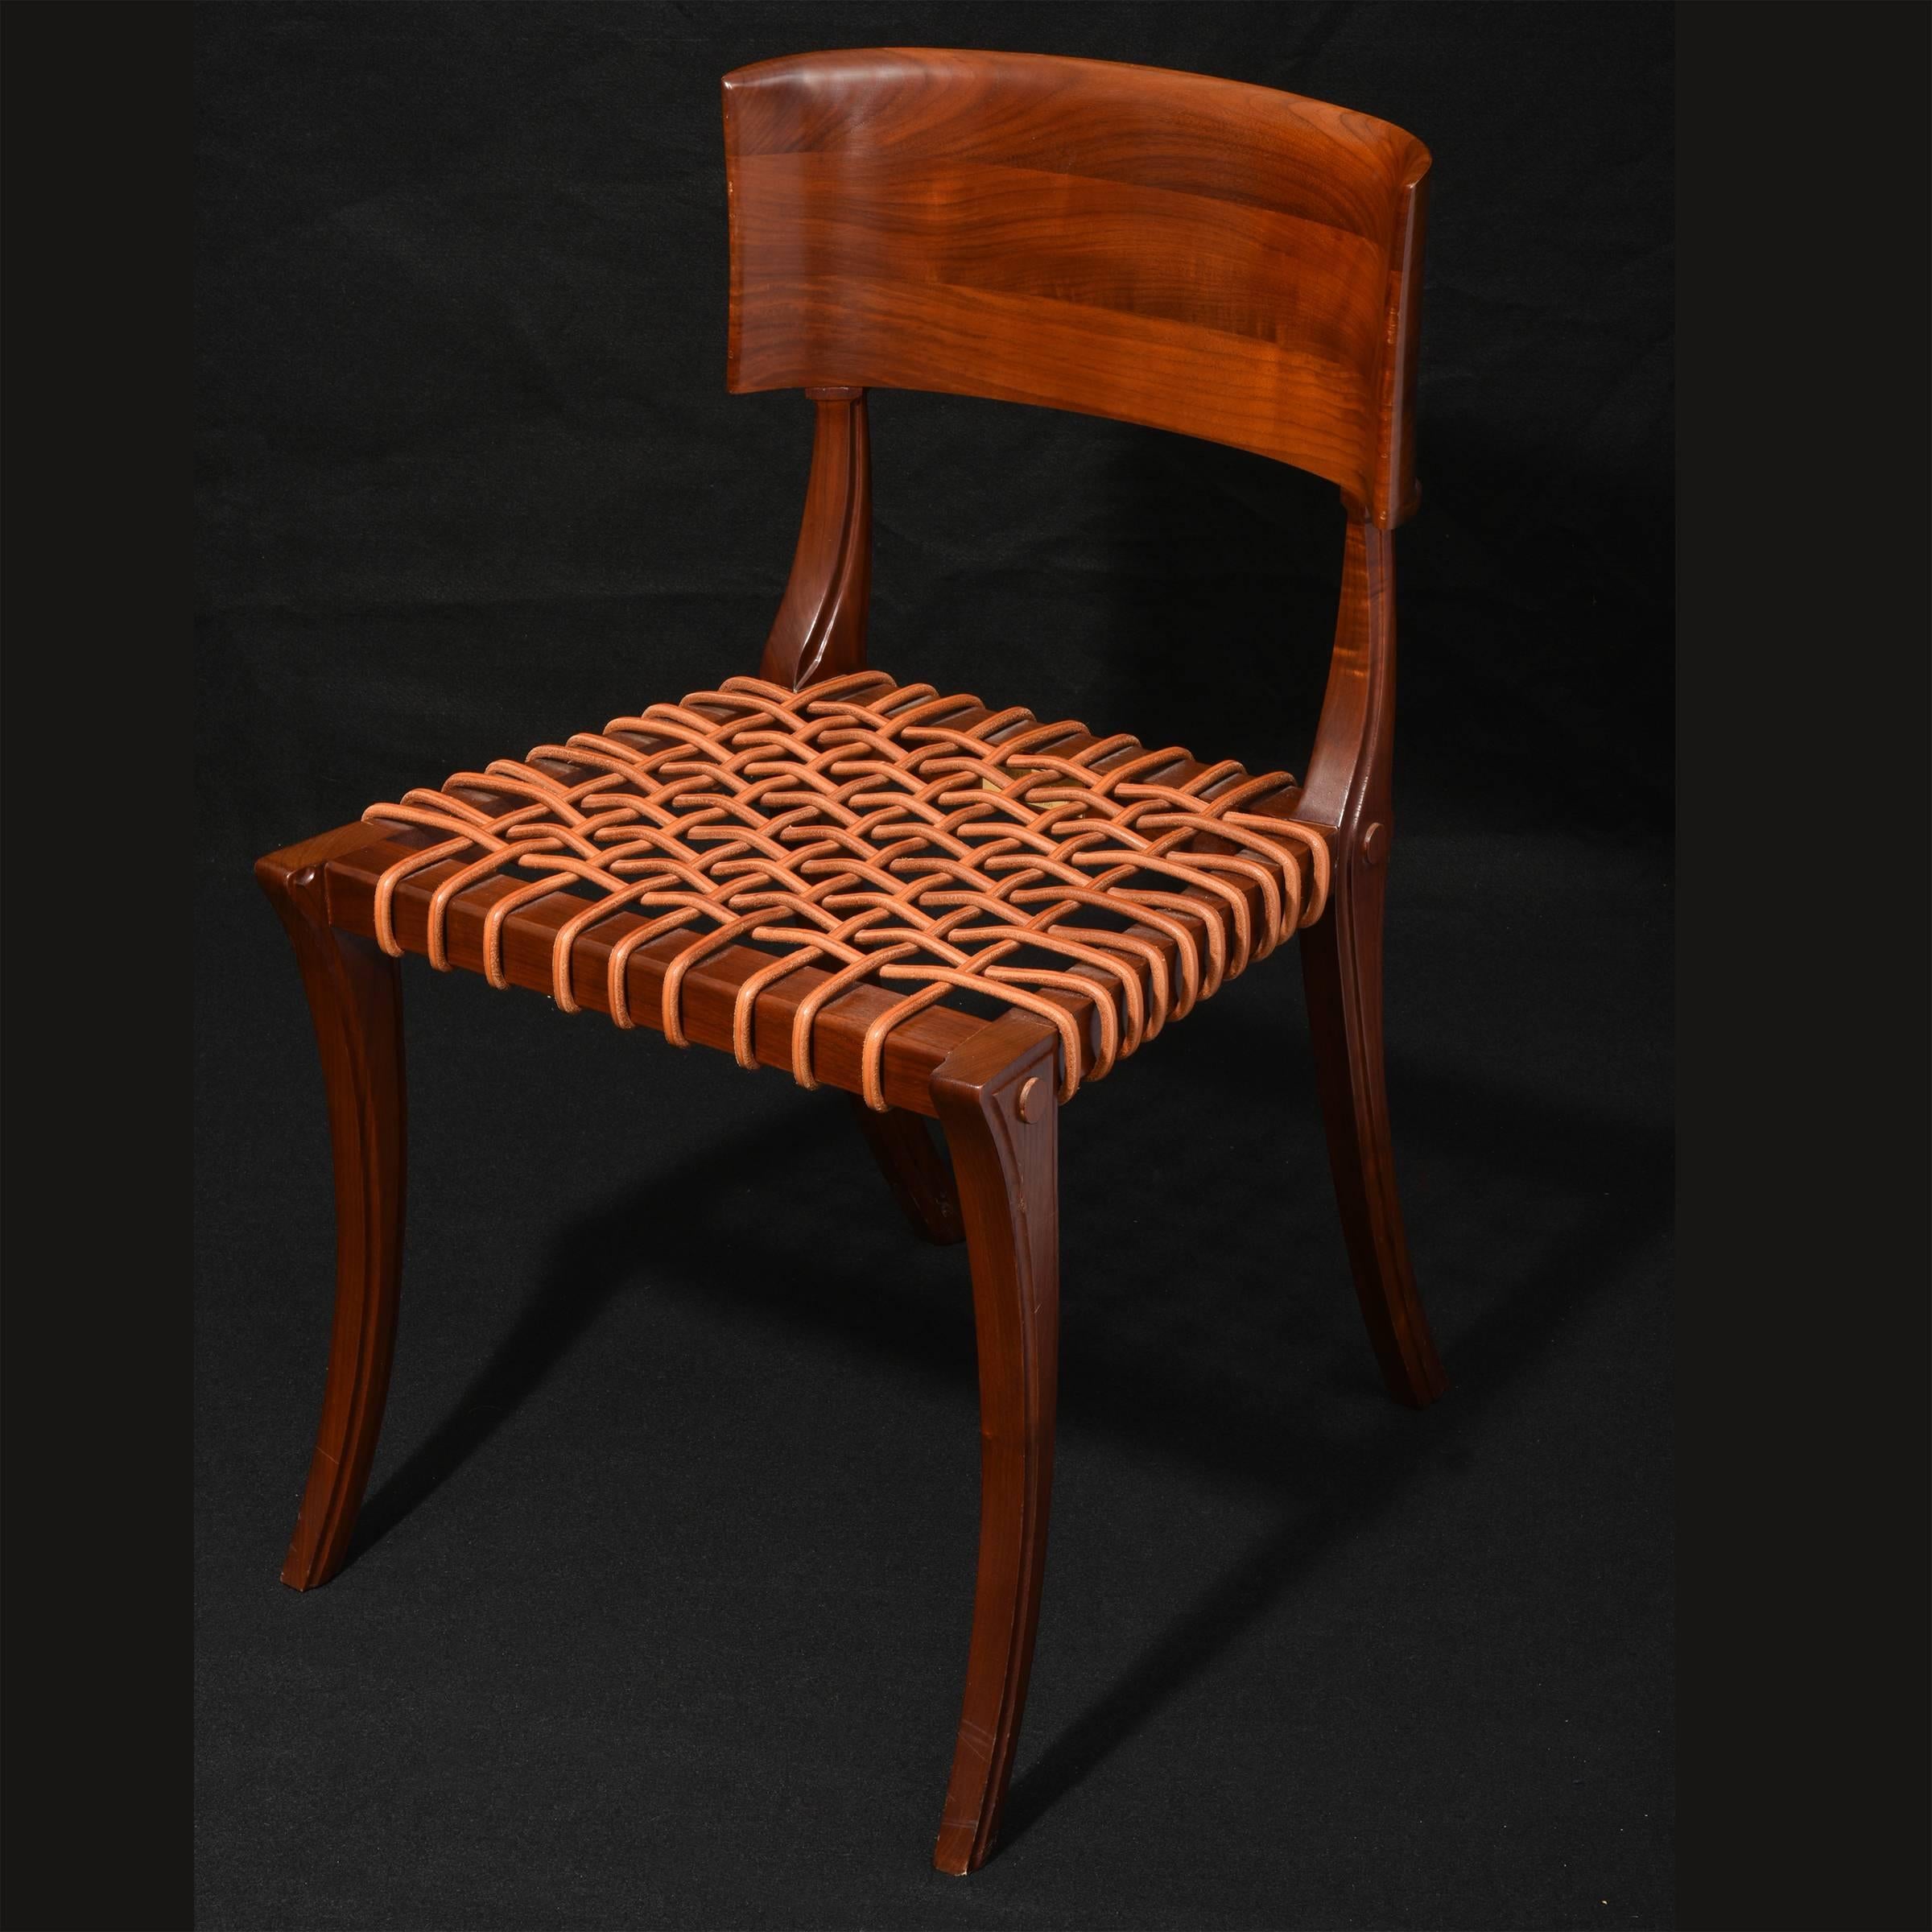 Klismos chair by T.H. Robsjohn-Gibbings

USA, circa 1990s.

Originally for Saridis of Athens, edition by Bexley Heath for John Widdicomb.

Walnut, original leather wrapped seat.

Measures: 35.5 H x 20 W x 28.5 D in.

Marked to underneath